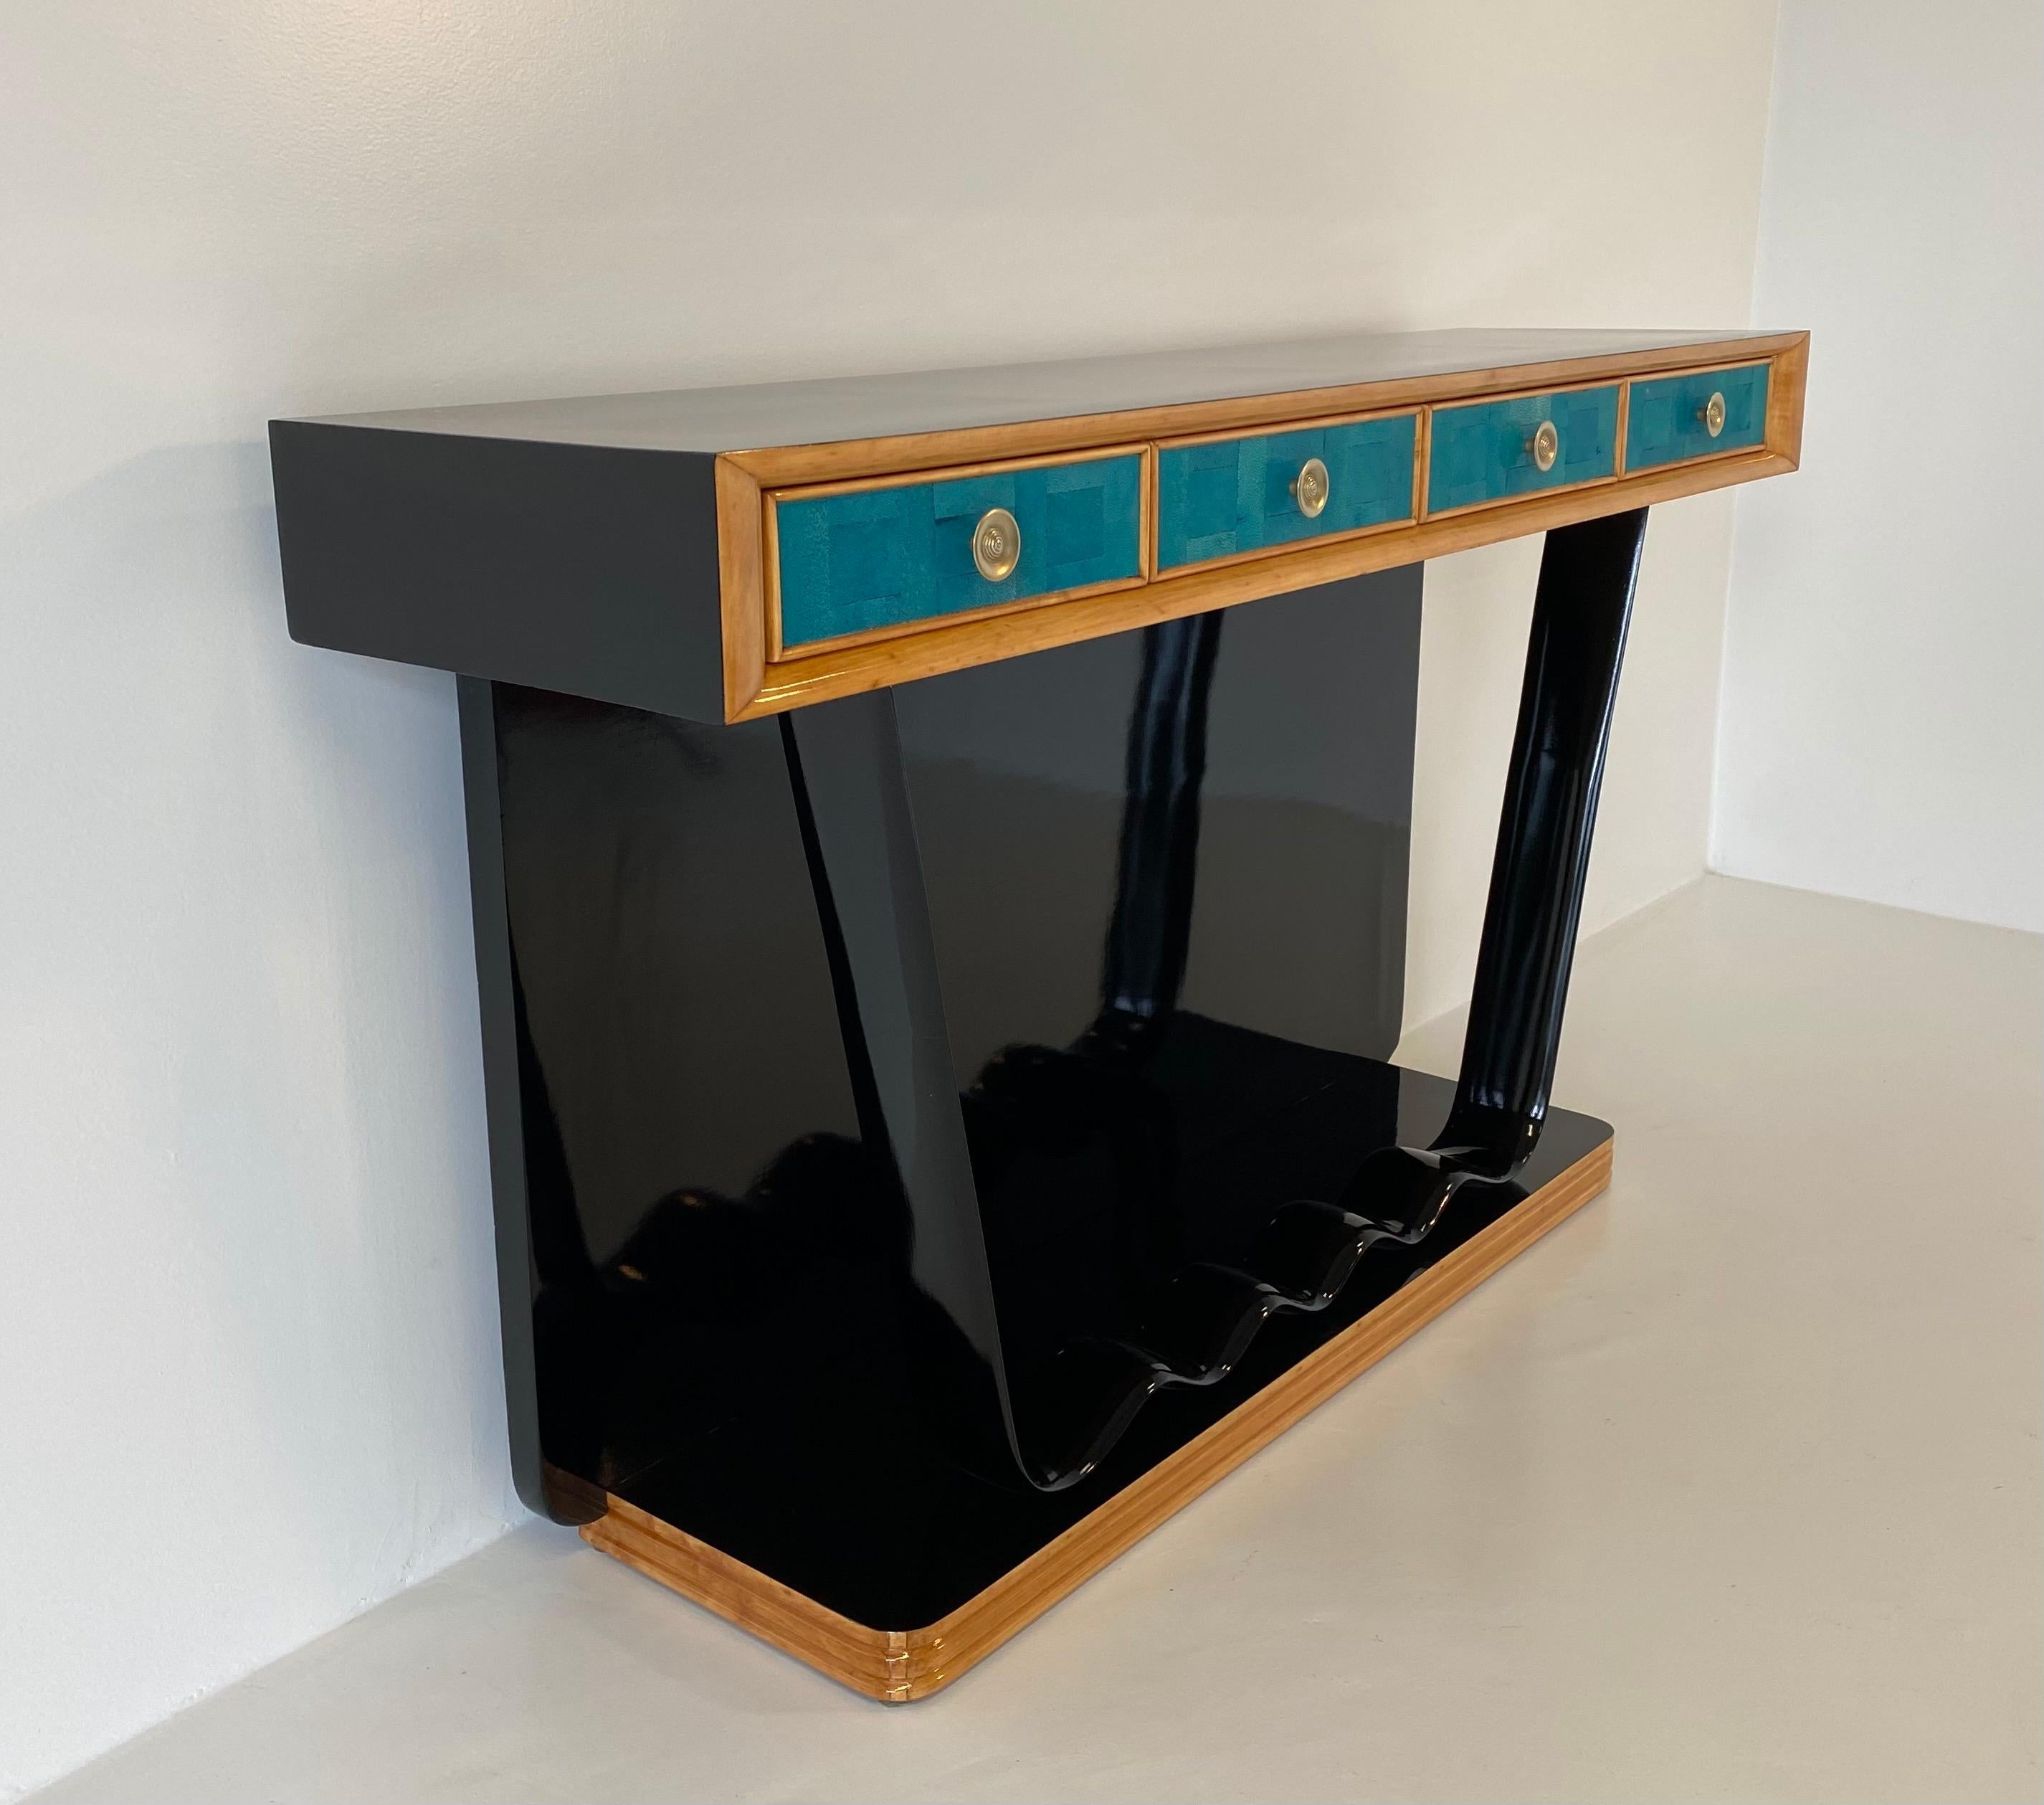 This console was produced in Italy in the 1940s, most likely based on a design by the architect Osvaldo Borsani.
It is entirely in black lacquered wood with solid maple profiles.
The front of the drawers are covered in precious blue shagreen